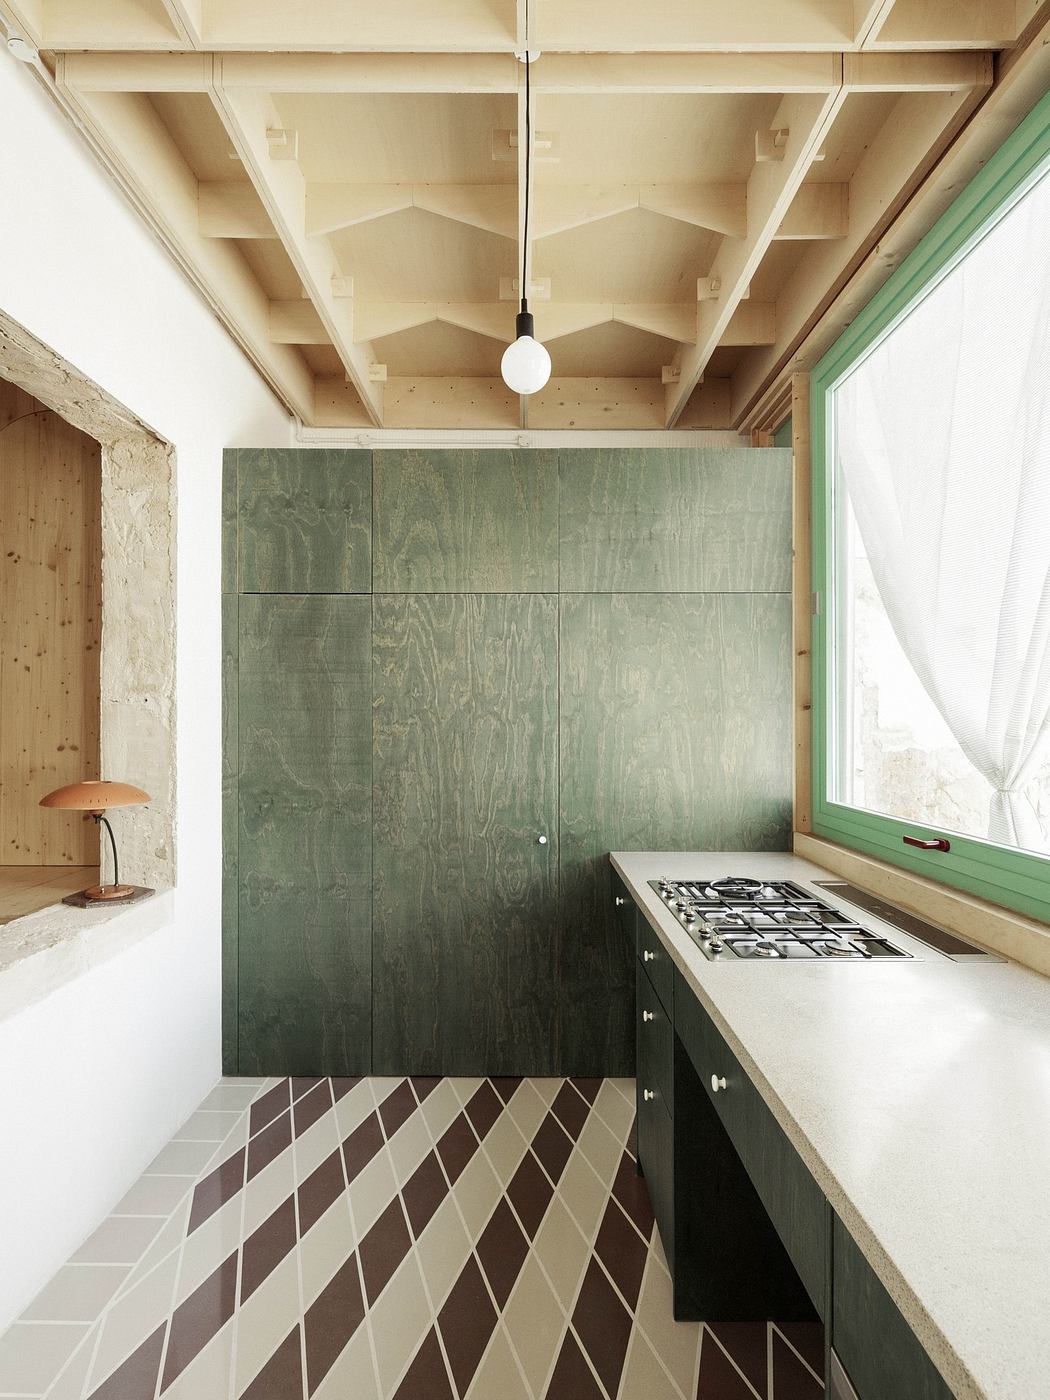 Modern kitchen corner with green cabinetry, patterned tiles, and exposed ceiling beams